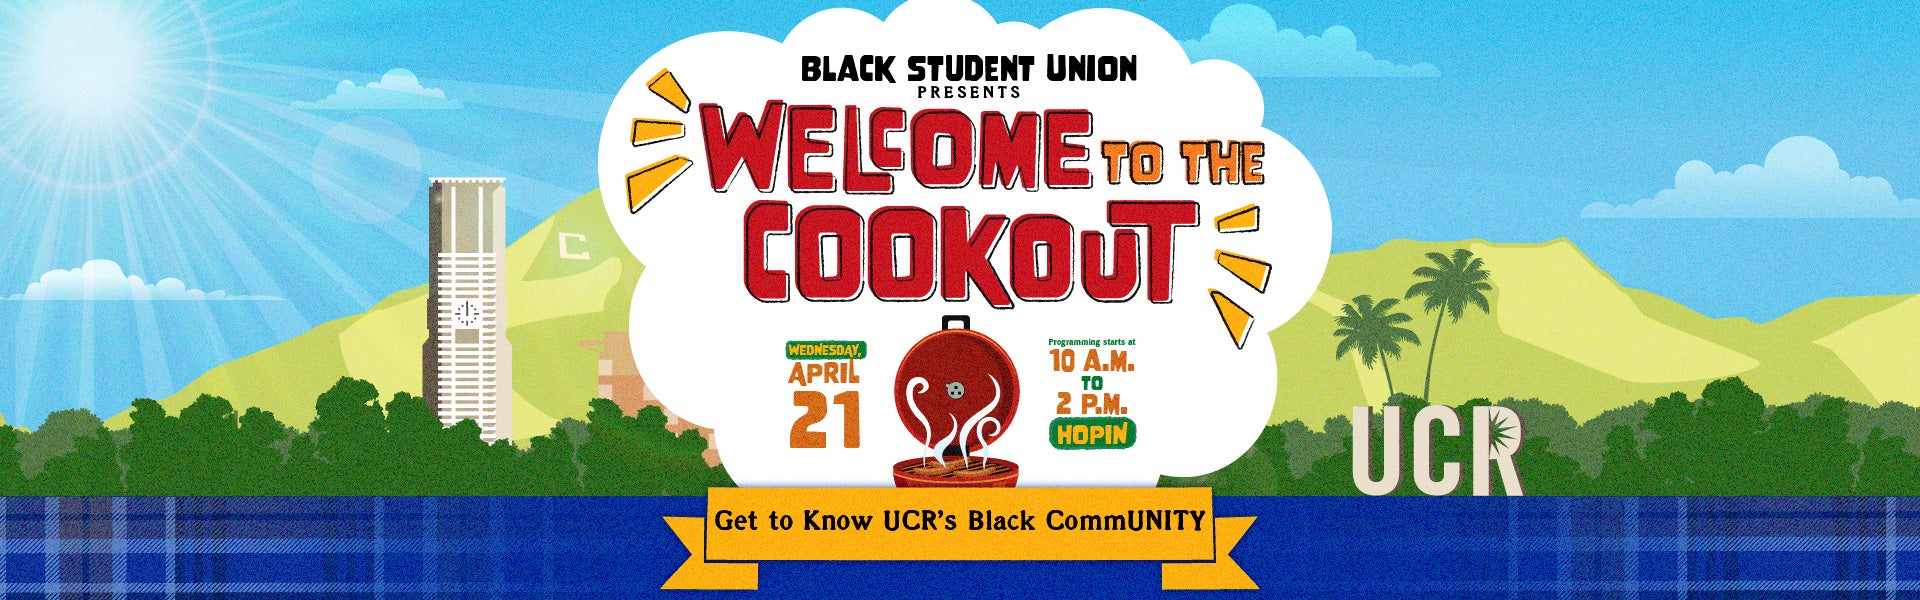 Welcome to the Cookout: Get to Know UCR's Black CommUNITY, Wednesday, April 21, 10am-2pm, Hopin